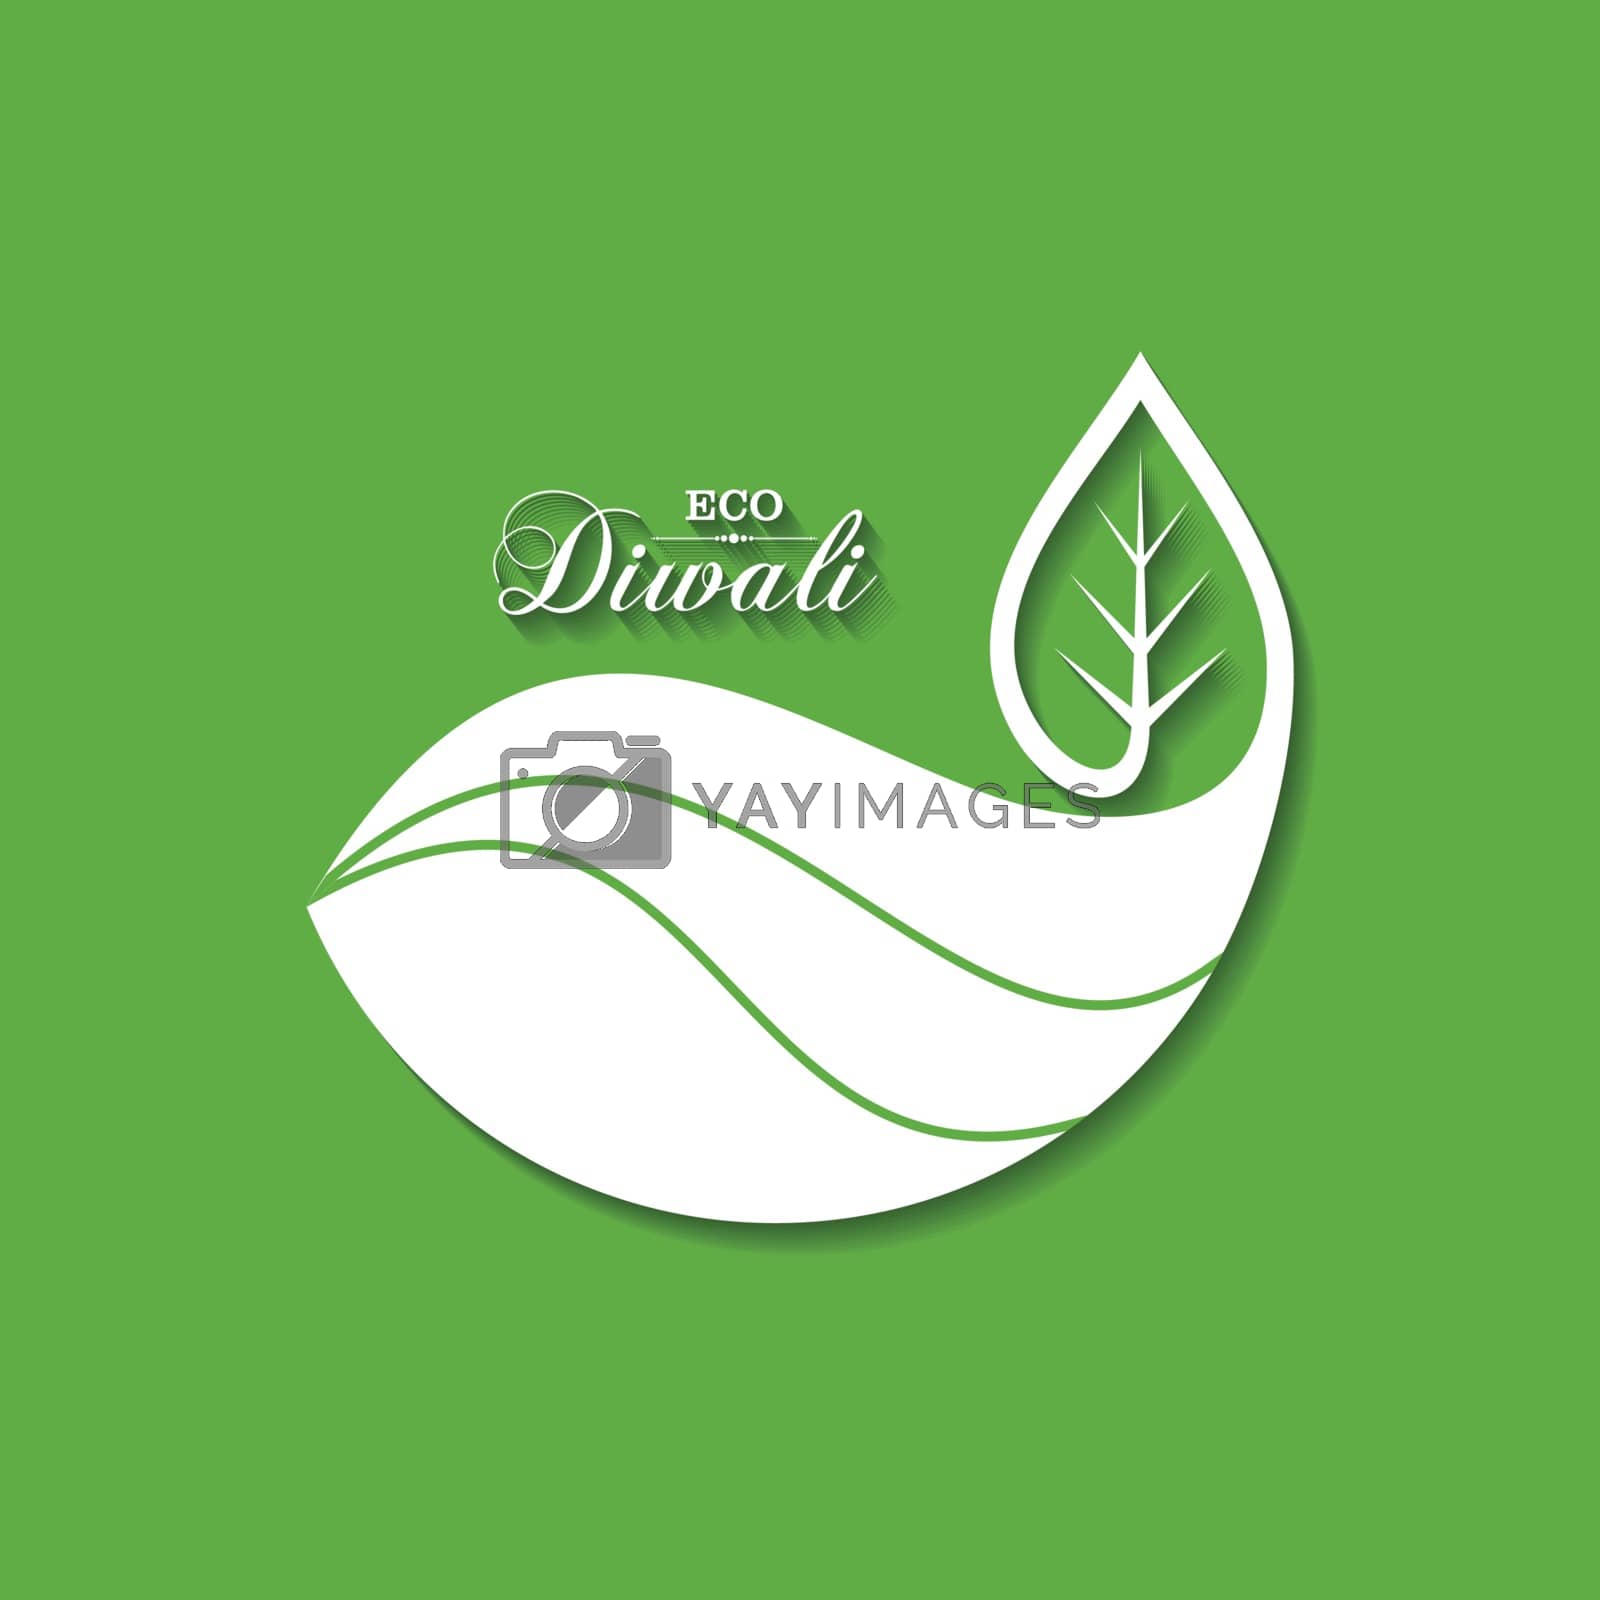 Royalty free image of Greeting for celebrate green diwali concept by graphicsdunia4you